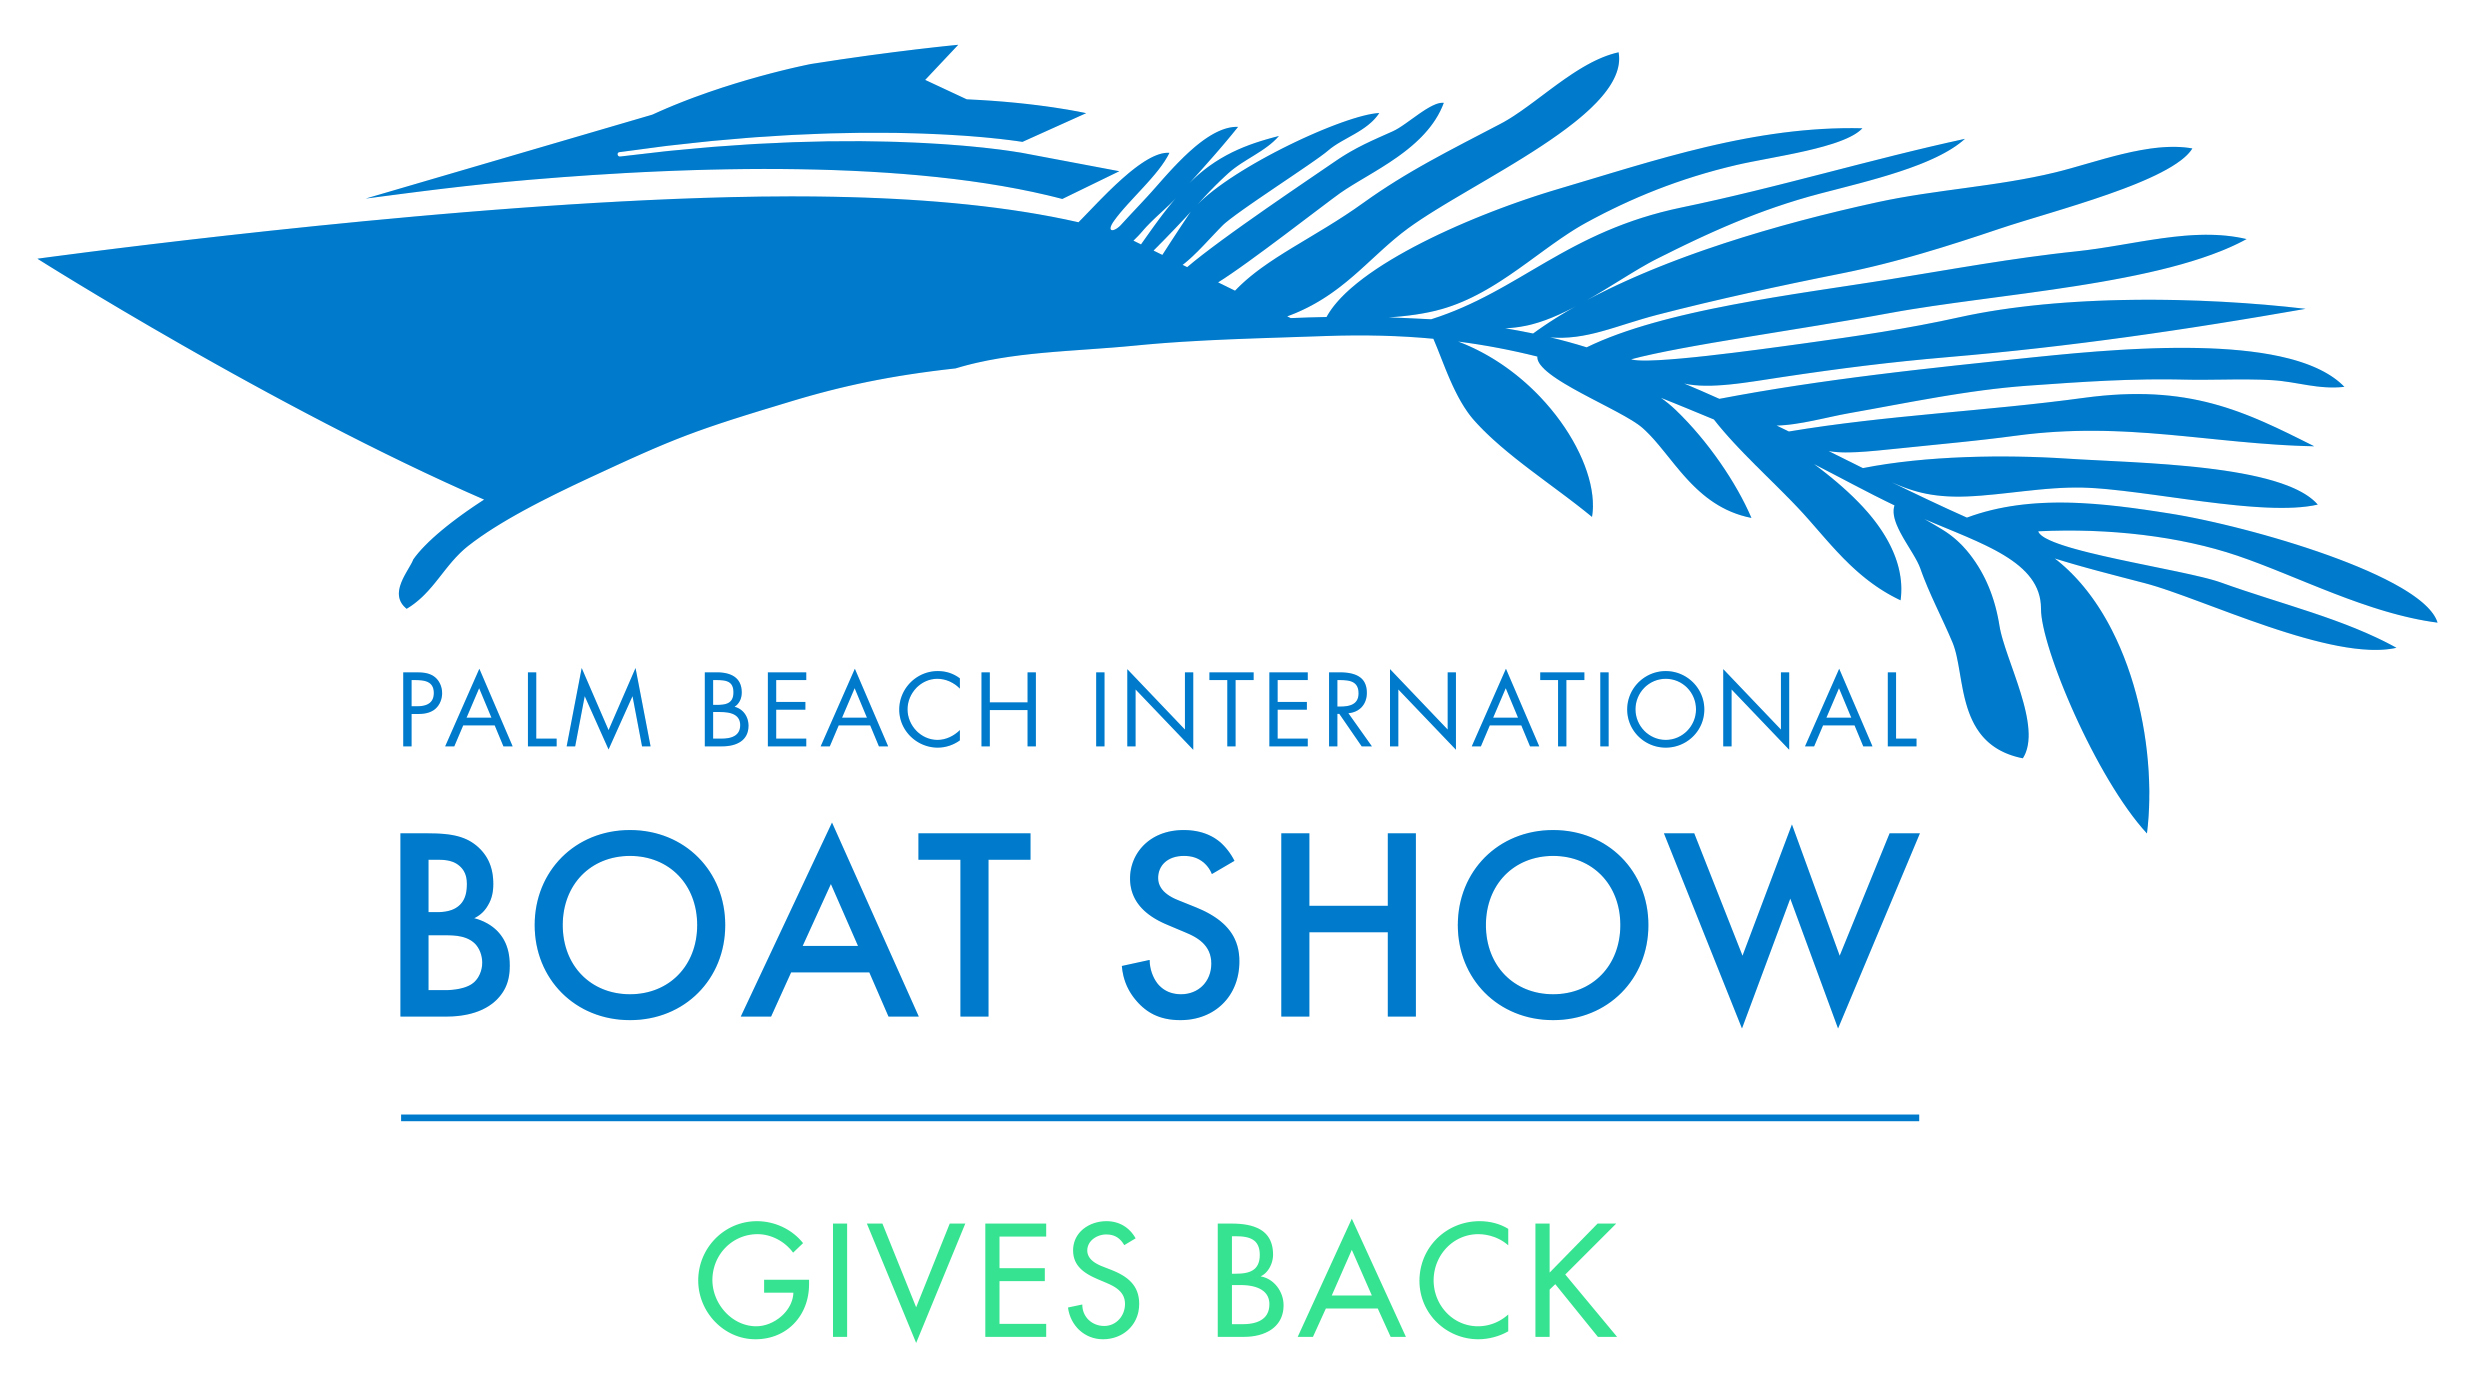 Palm Beach International Boat Show - Gives Back